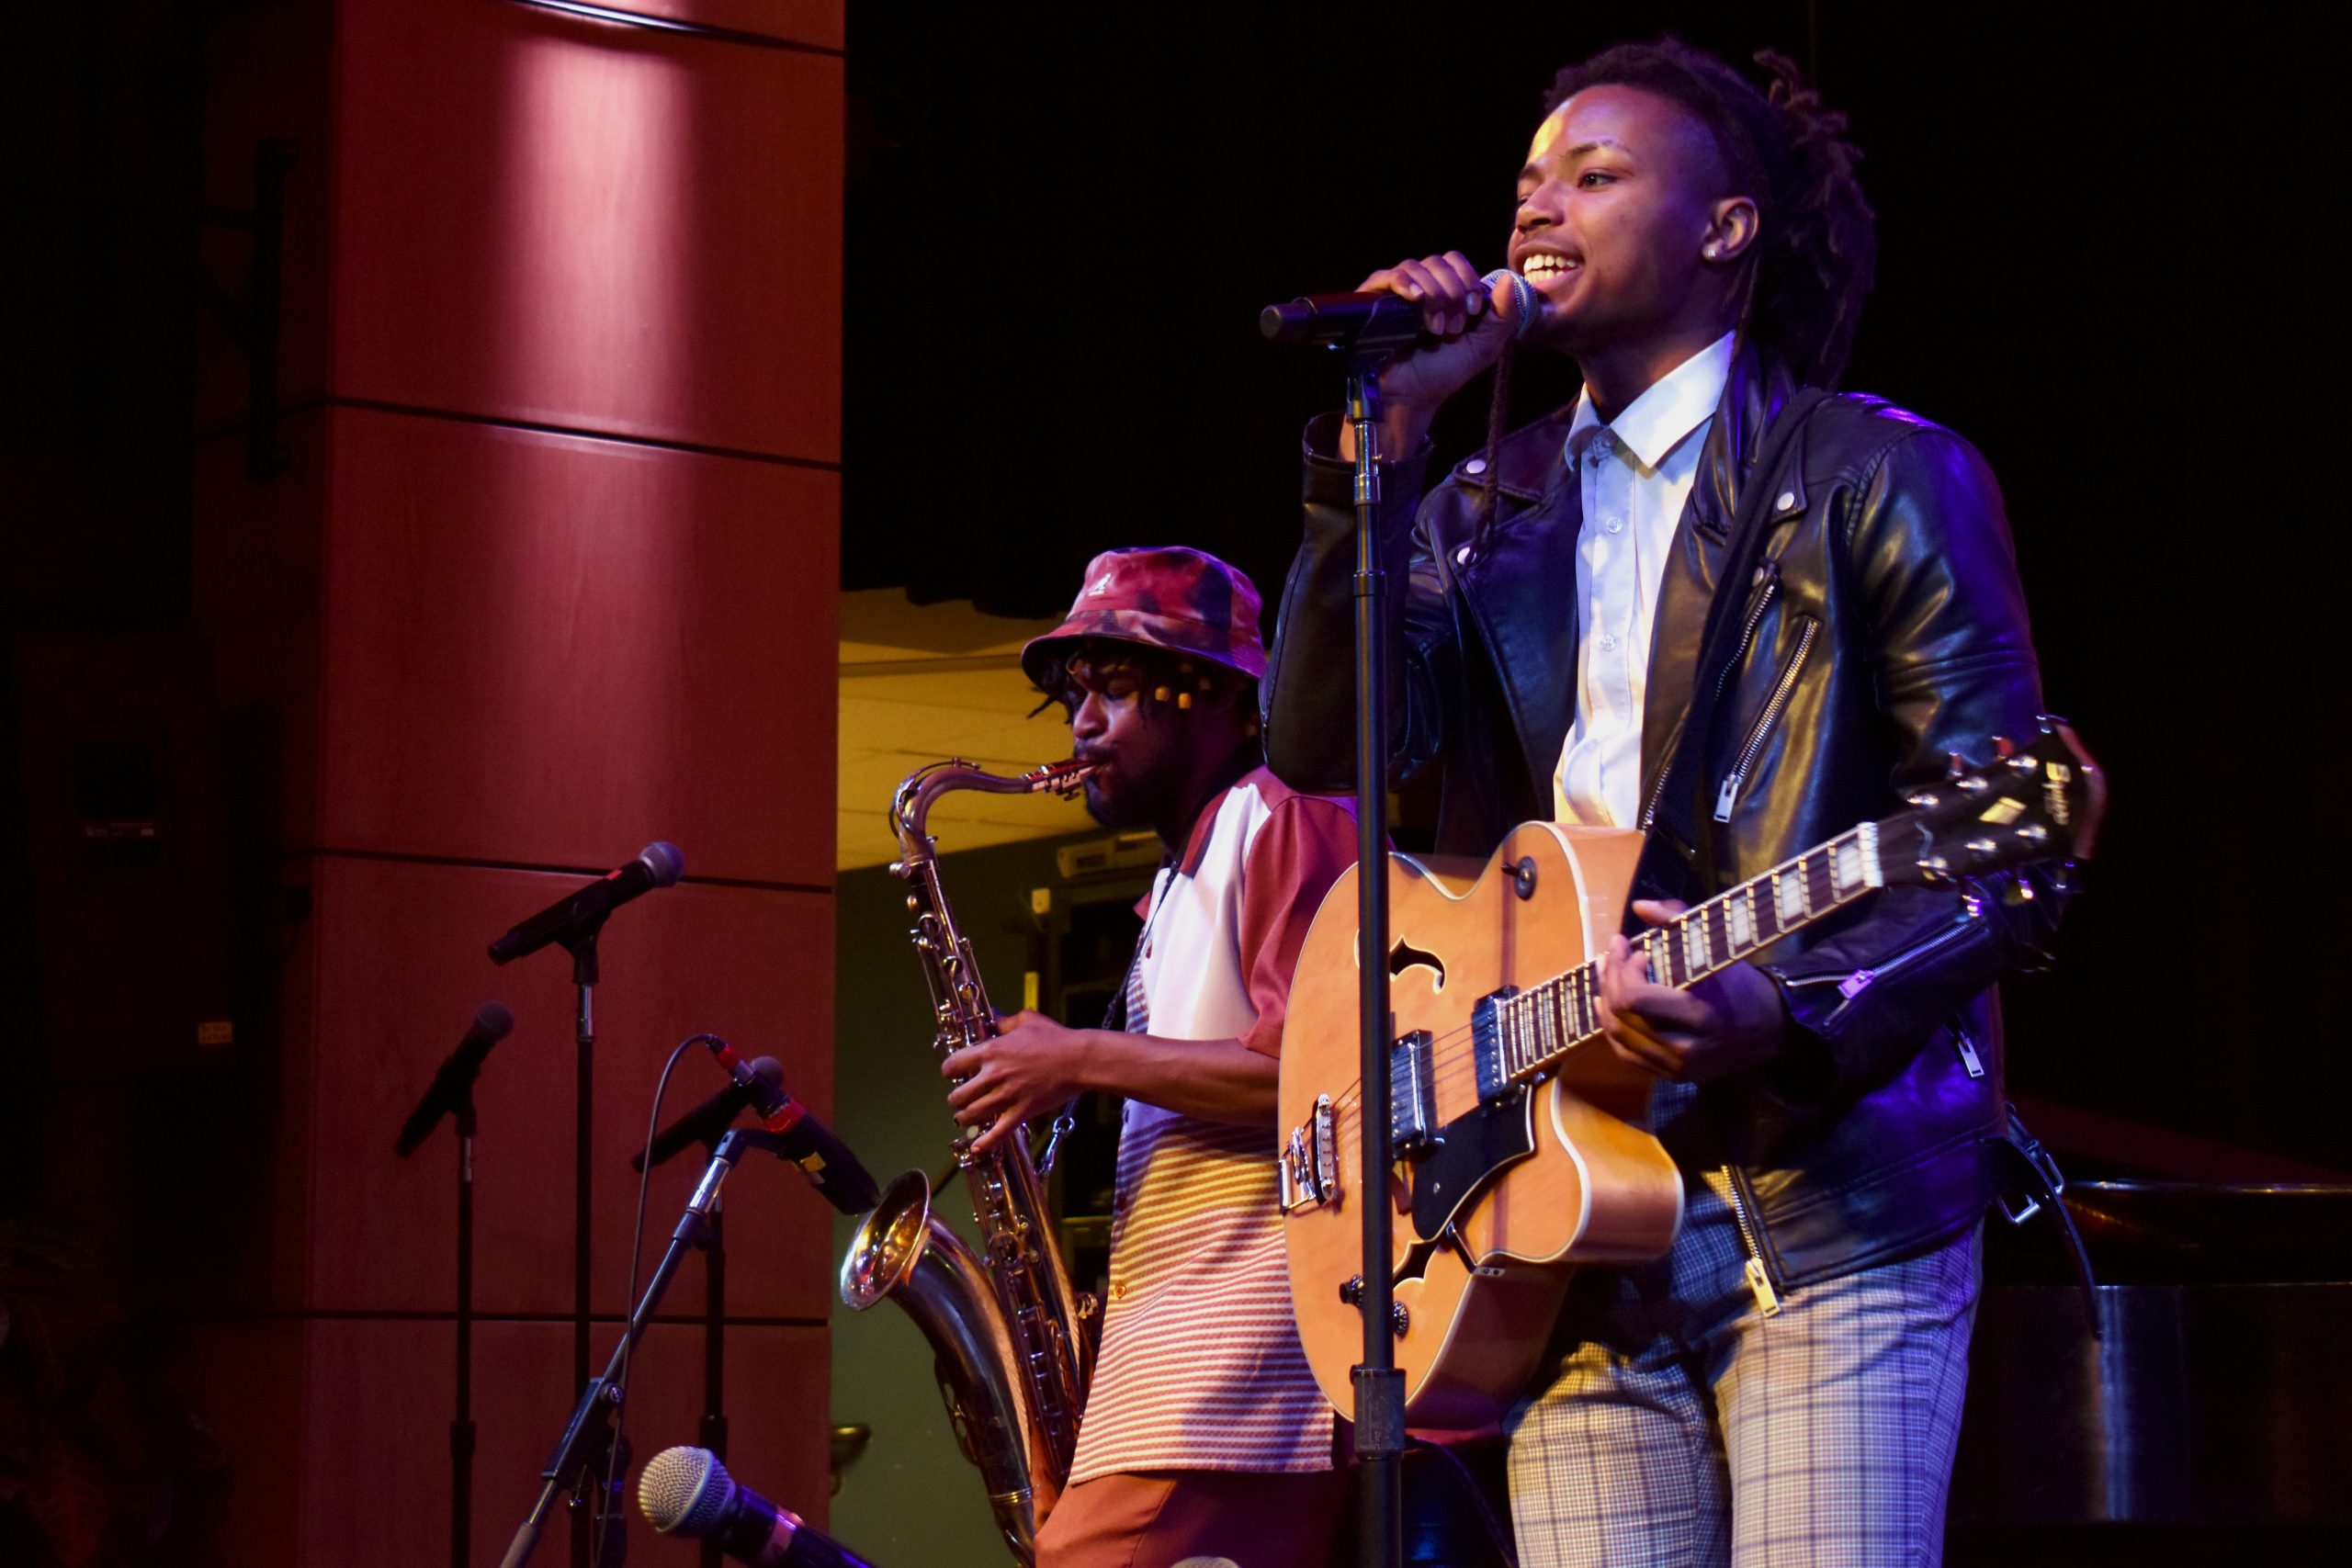 Rapper and musician K-STAMP performs with a live band at the Berklee Professional Music Department’s International Hip Hop Symposium, April 12, 2022 (photo credit: Brandon Hill).